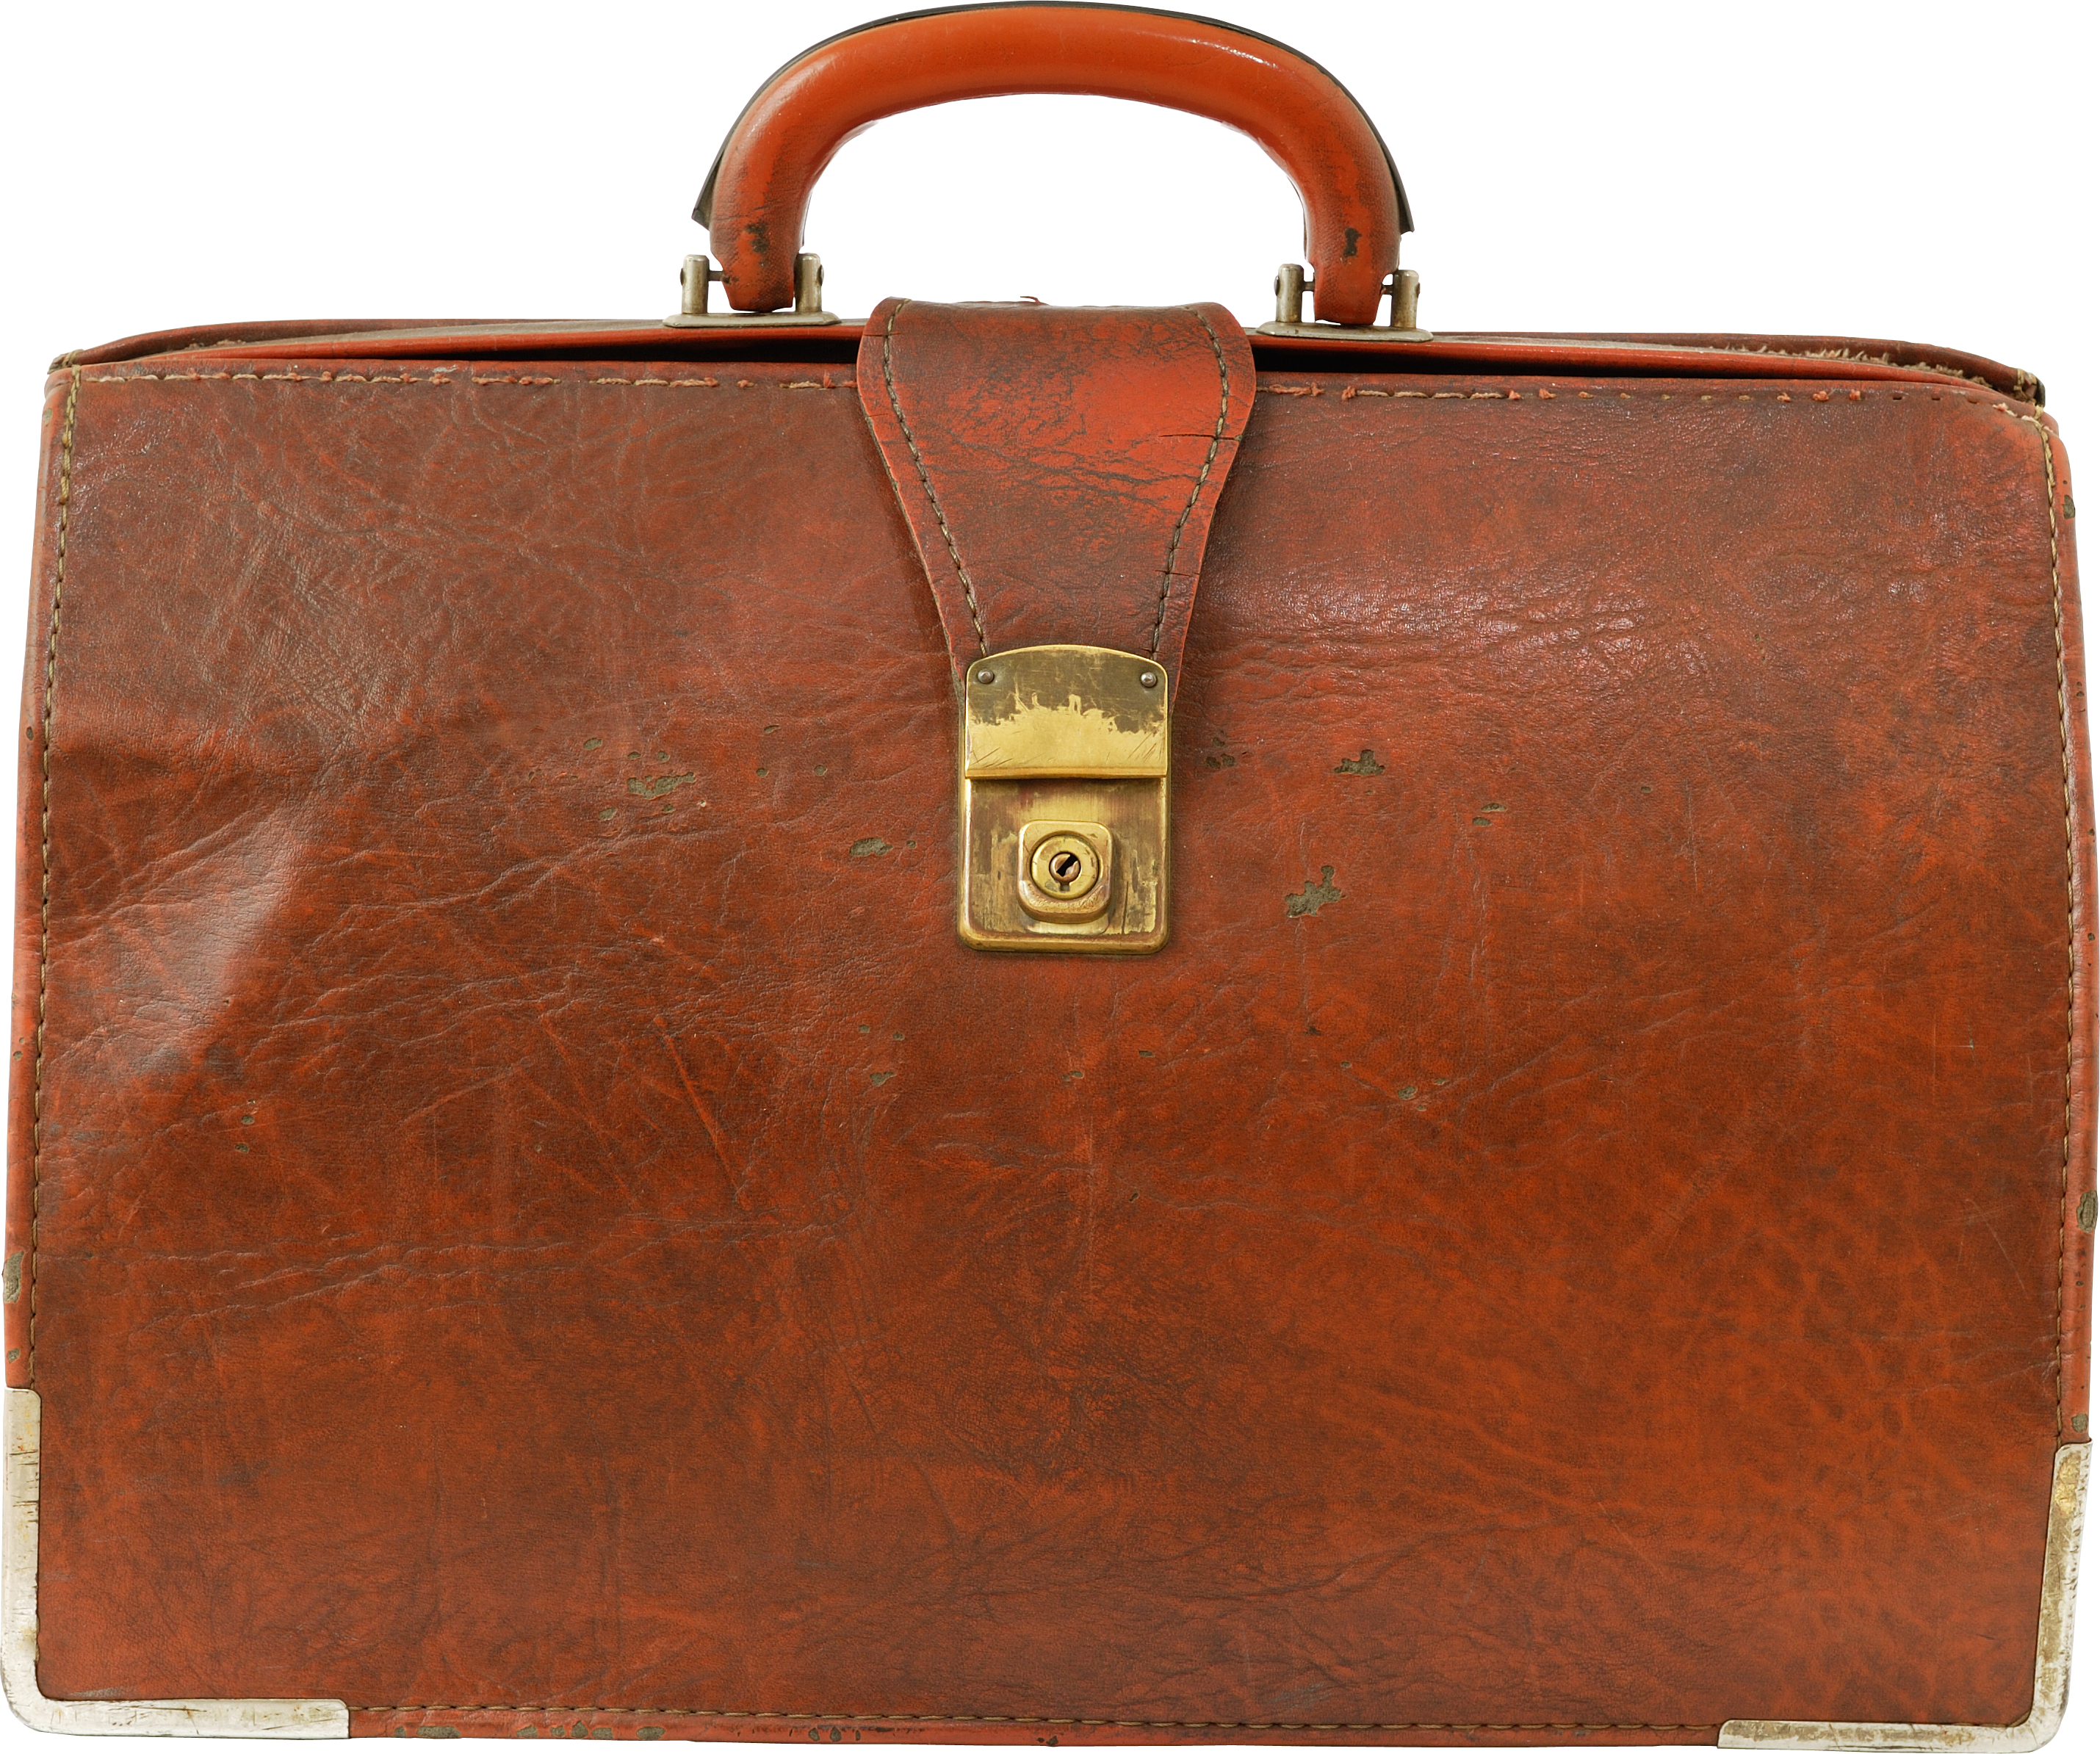 suitcase PNG